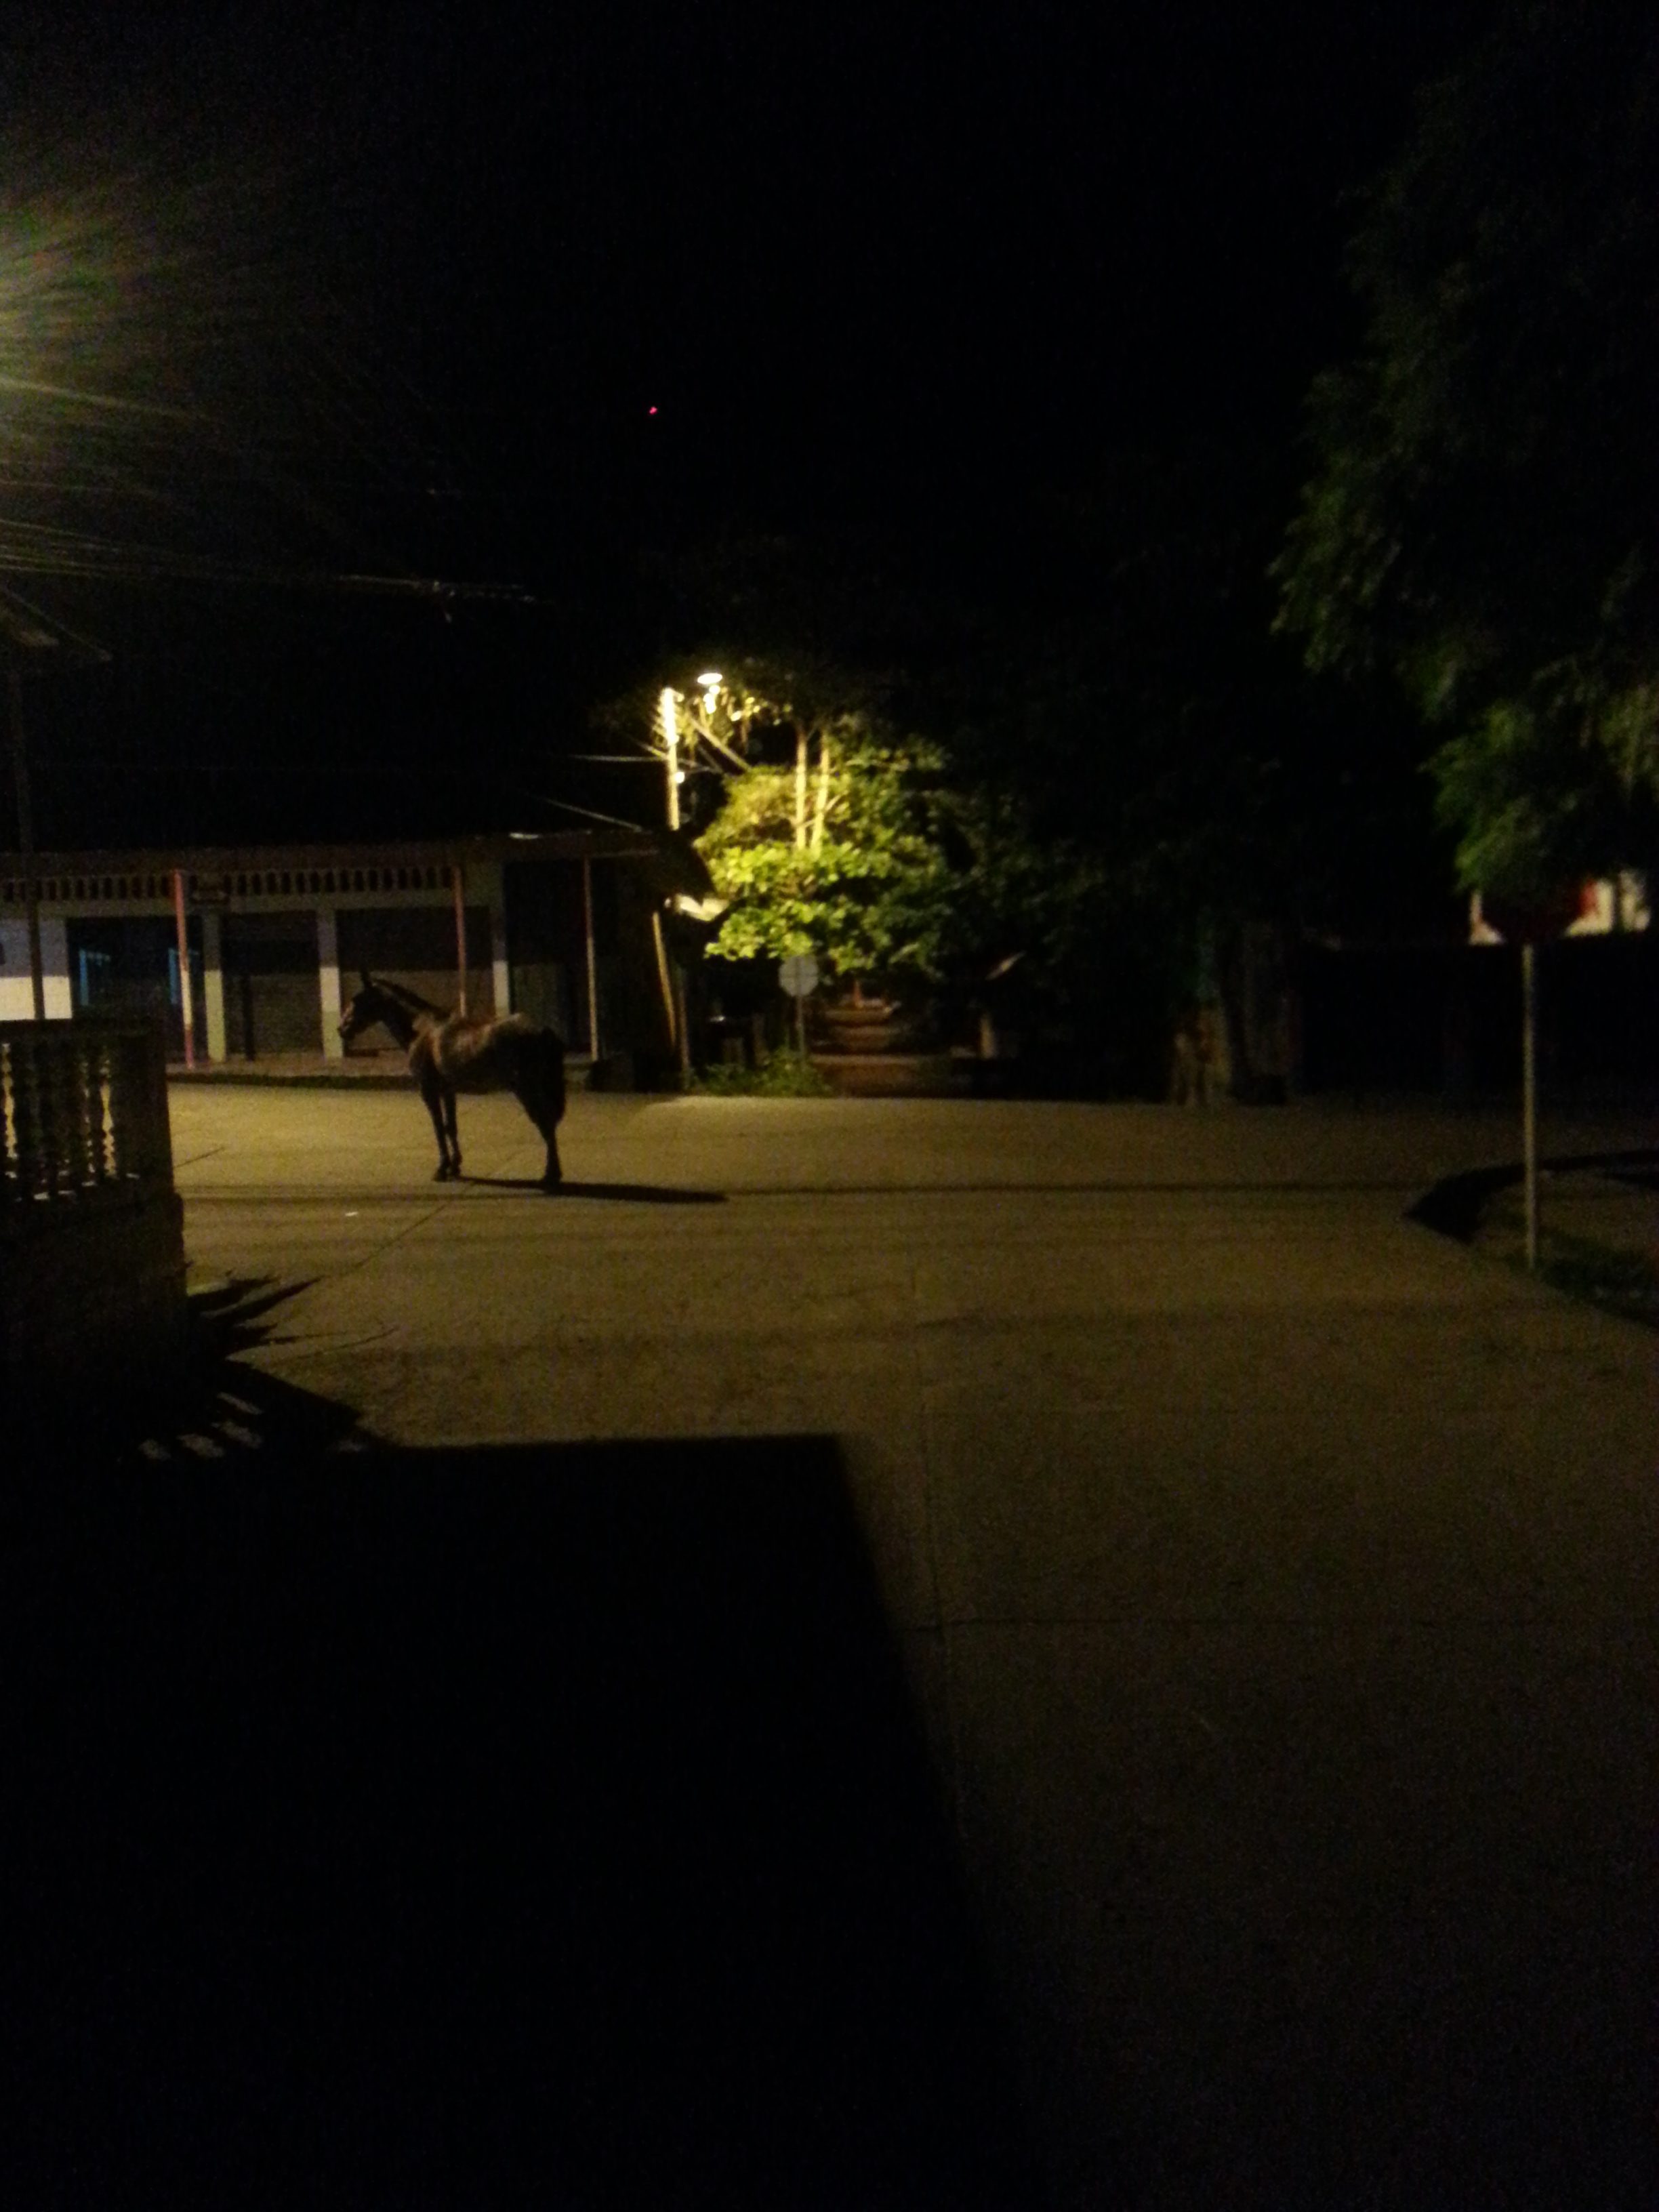 A lone horse stands guard on the dimly-lit street of Curillo, Caquetá, Colombia.